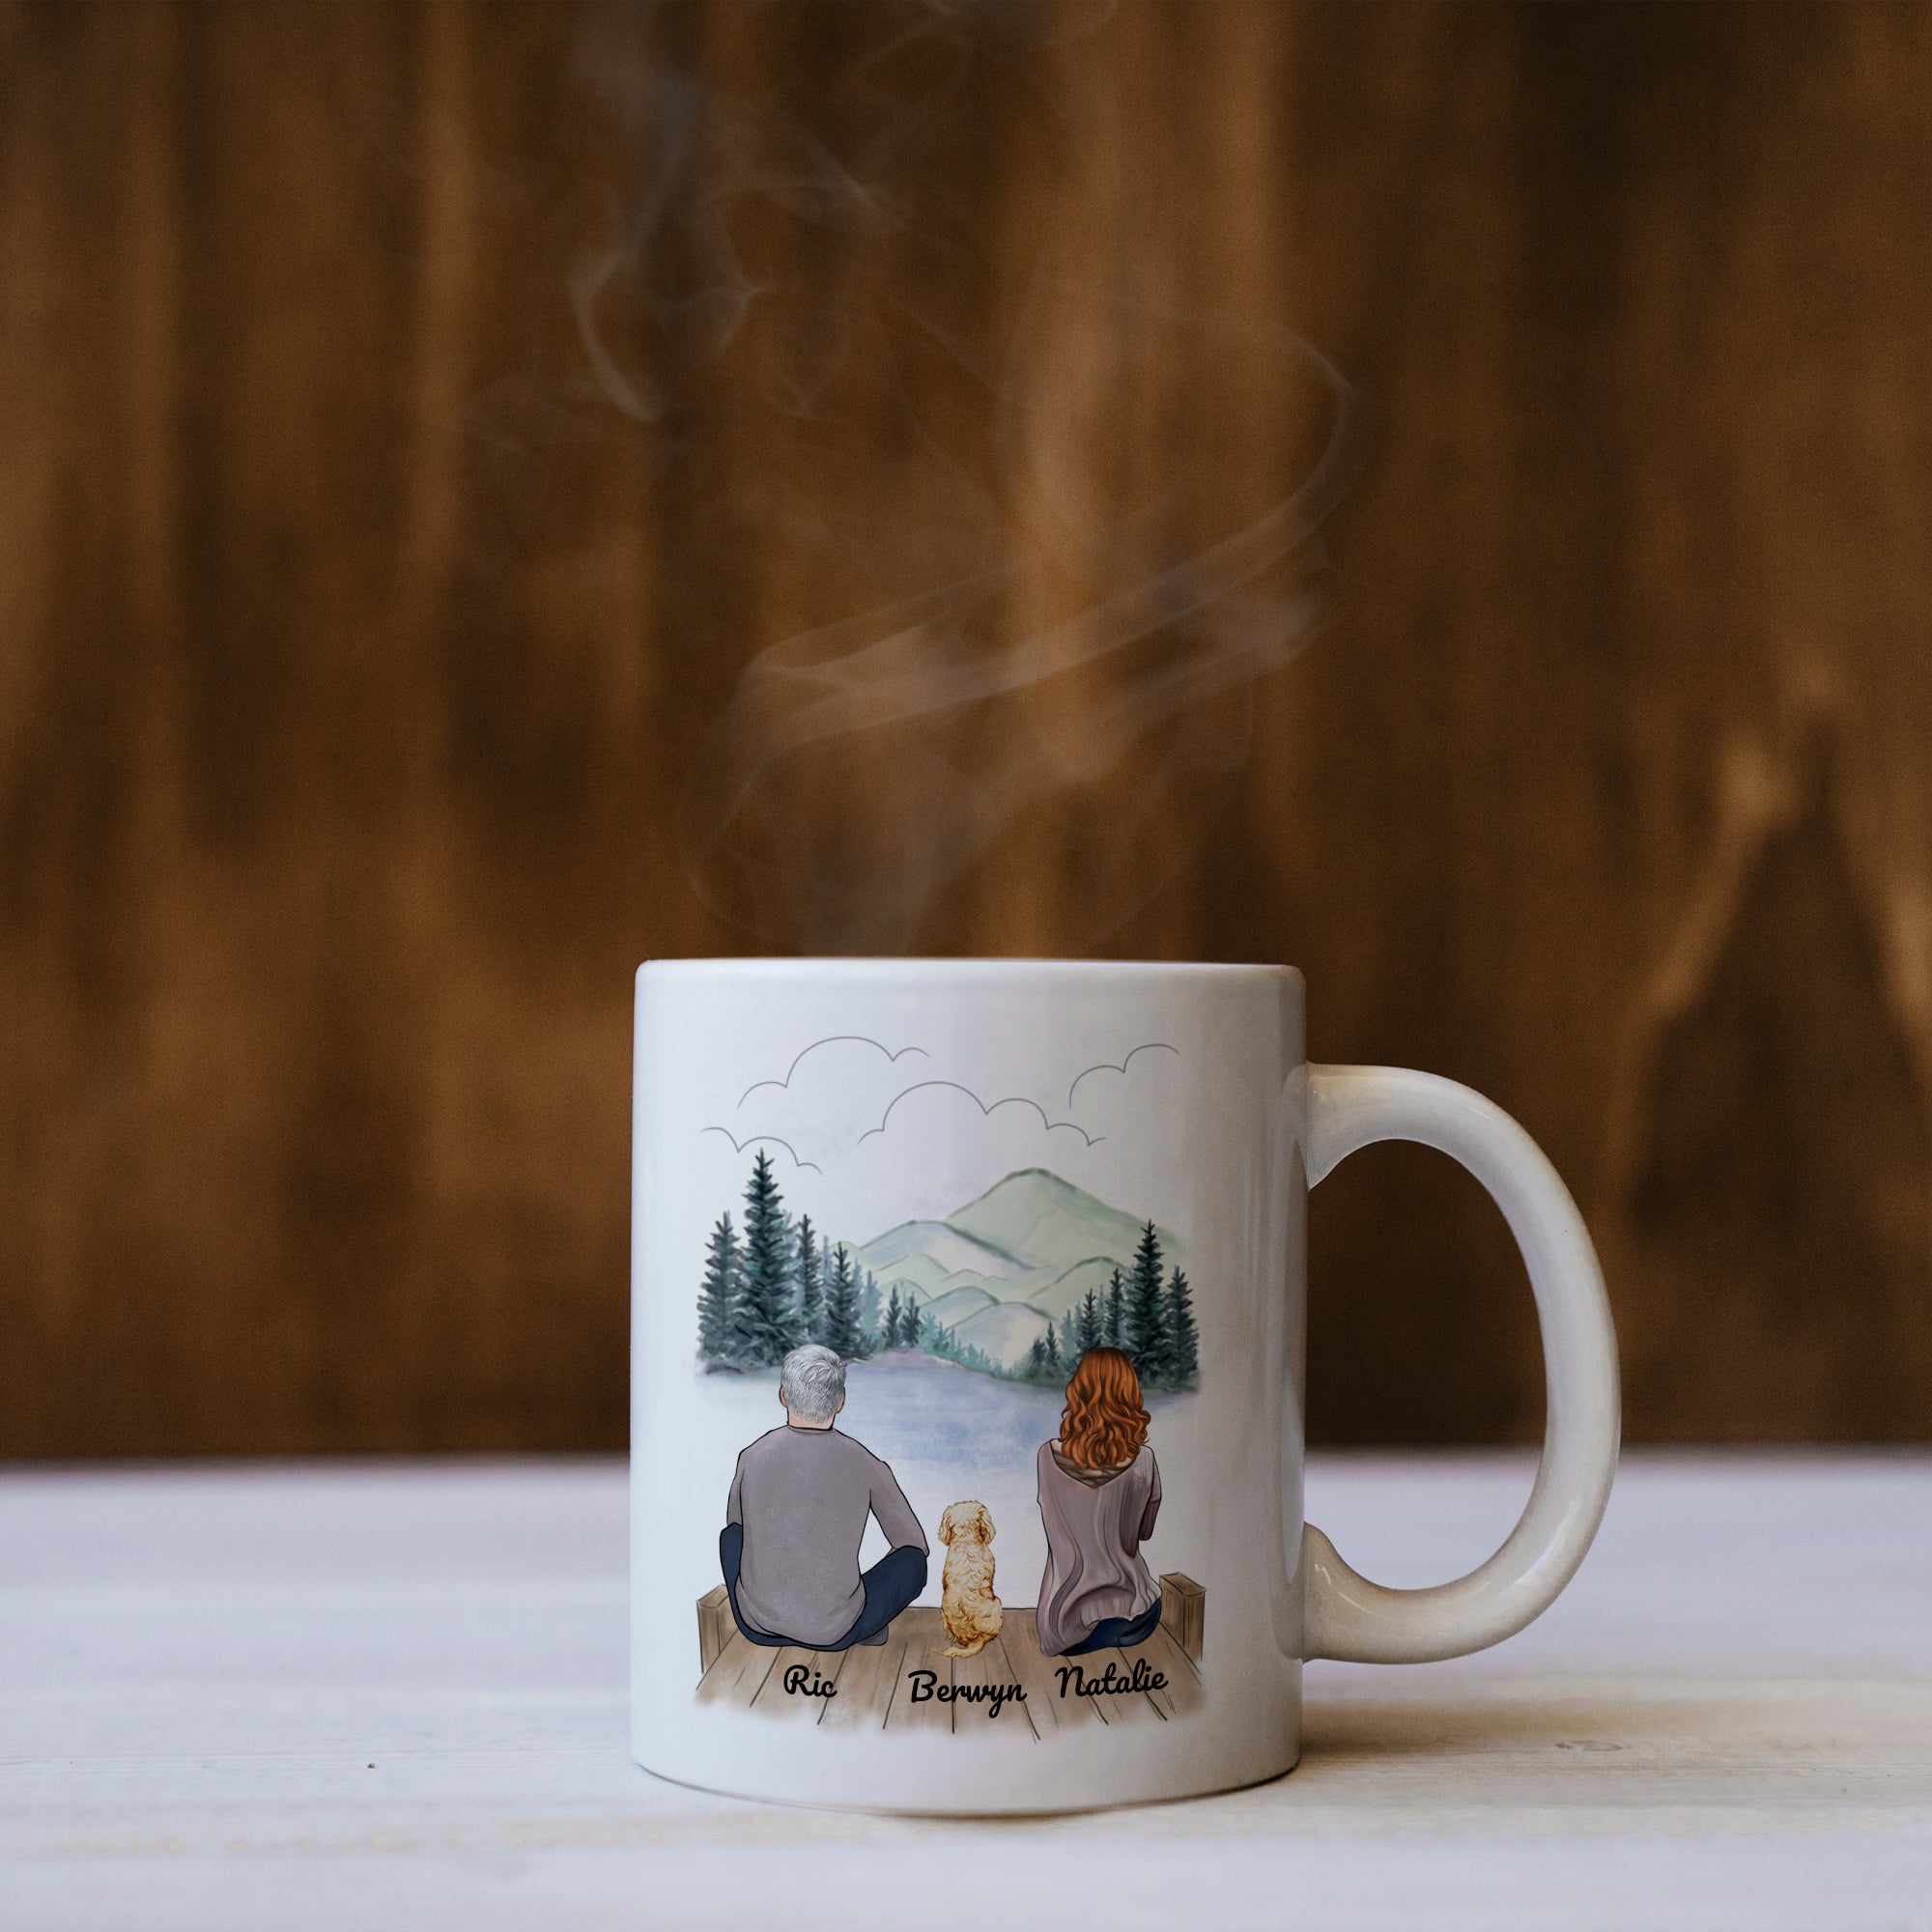 Always Together Personalized Mug - Name, couple, quote can be customiz –  Giftymize™️